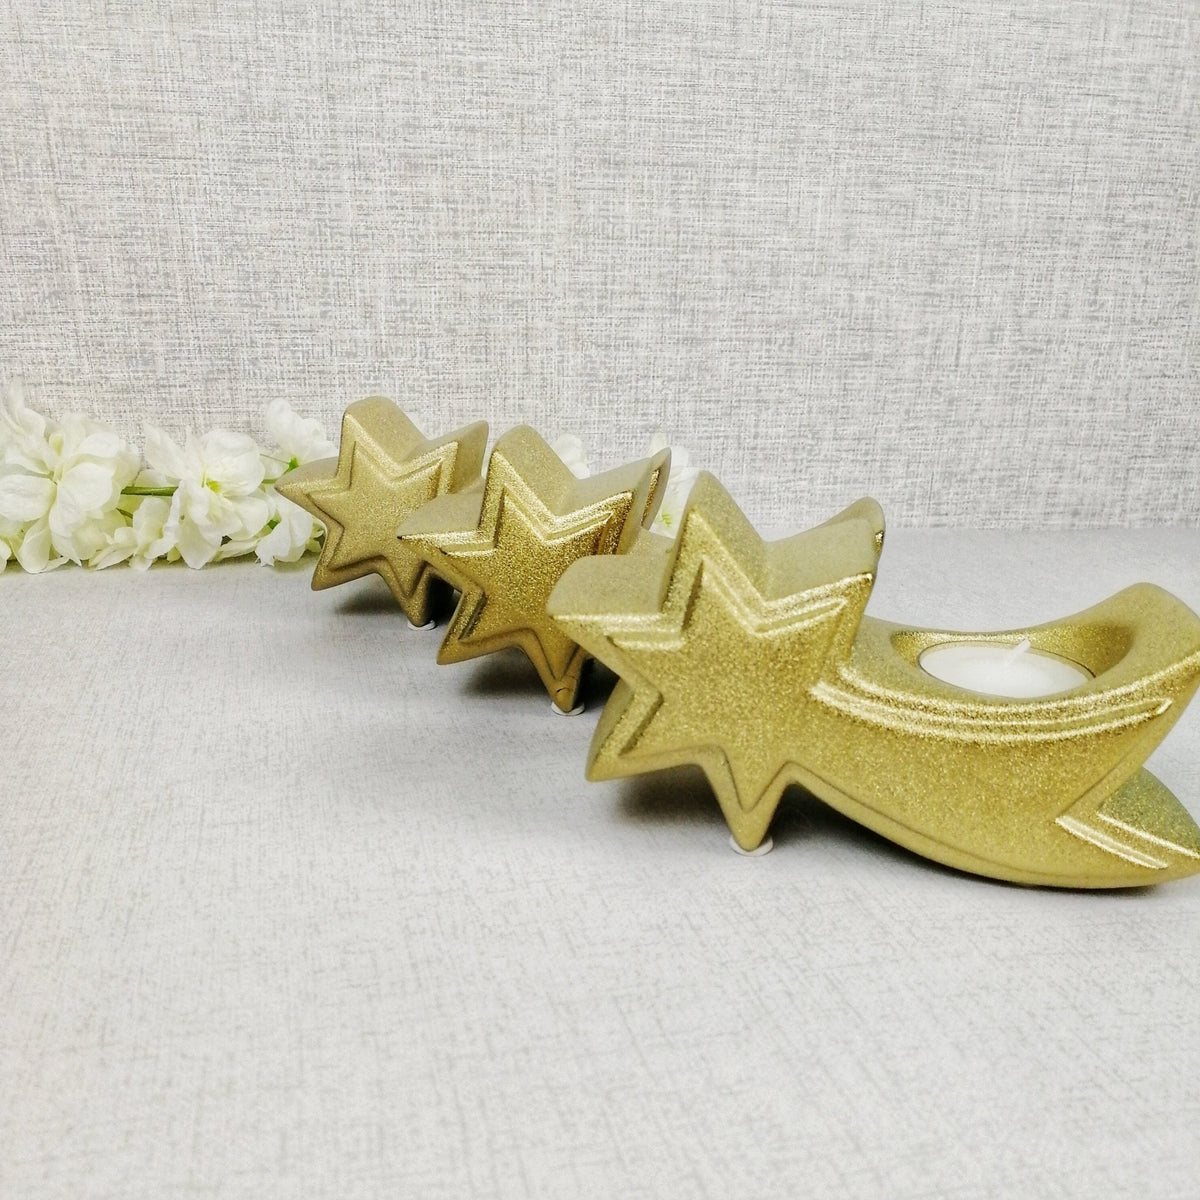 Set of three gold star tea light candle holders in a row